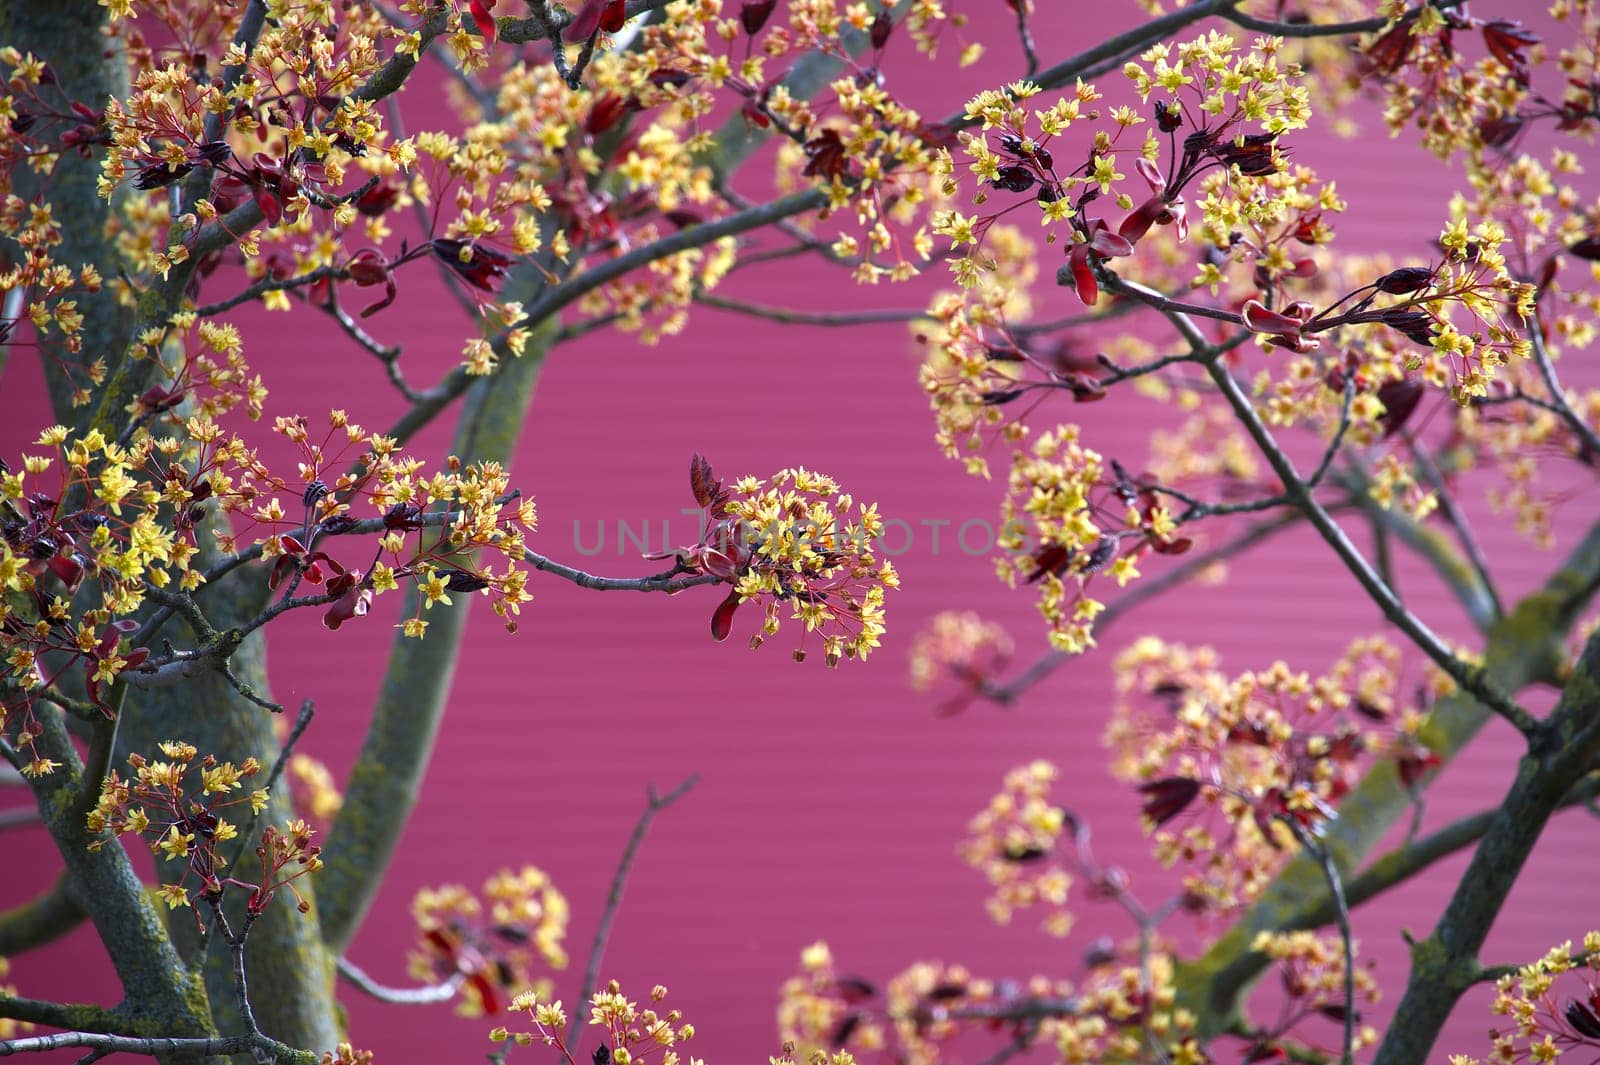 Red maple female tree covered with small yellow blossoms that form clusters along its branches, contrasting beautifully with the pink wall background